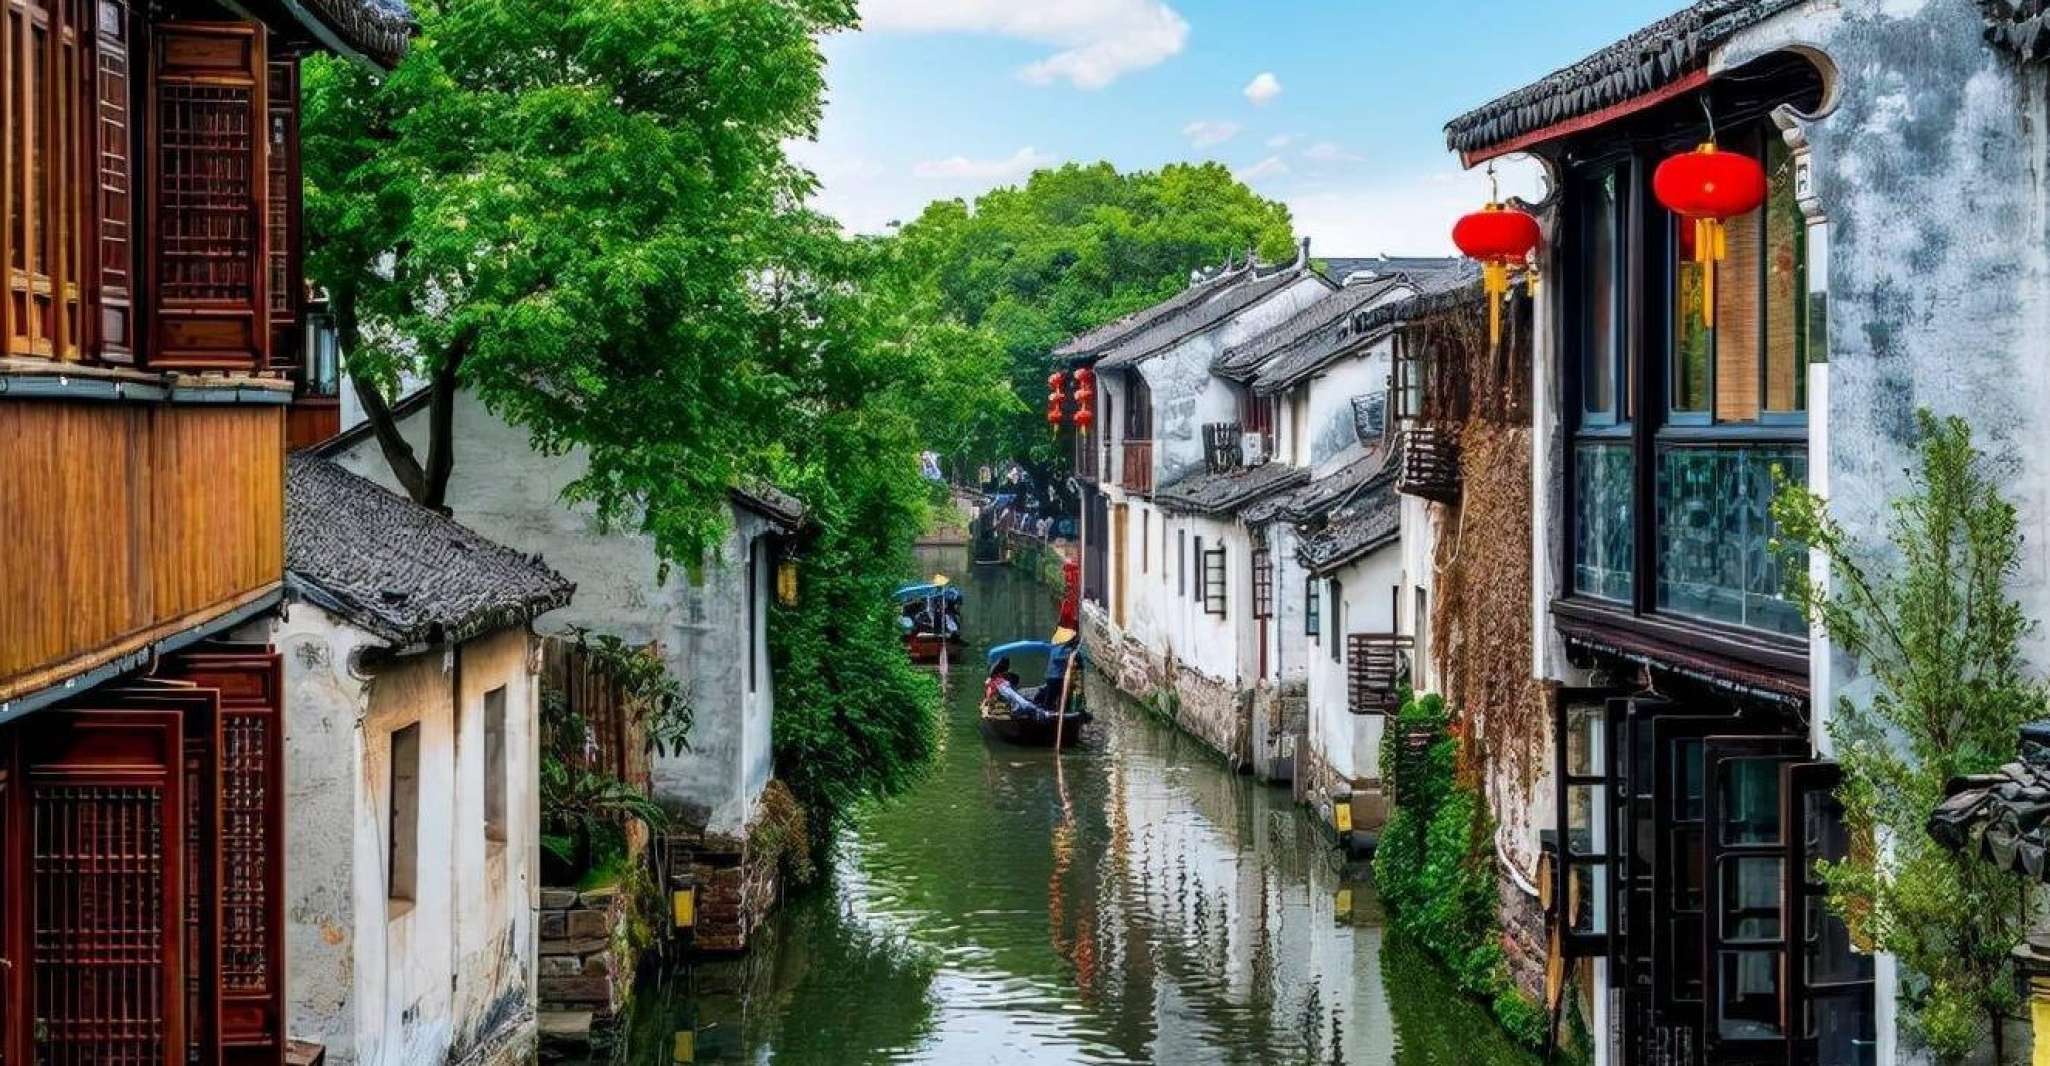 From Shanghai, Private Zhujiajiao Tour with Boat Ride - Housity